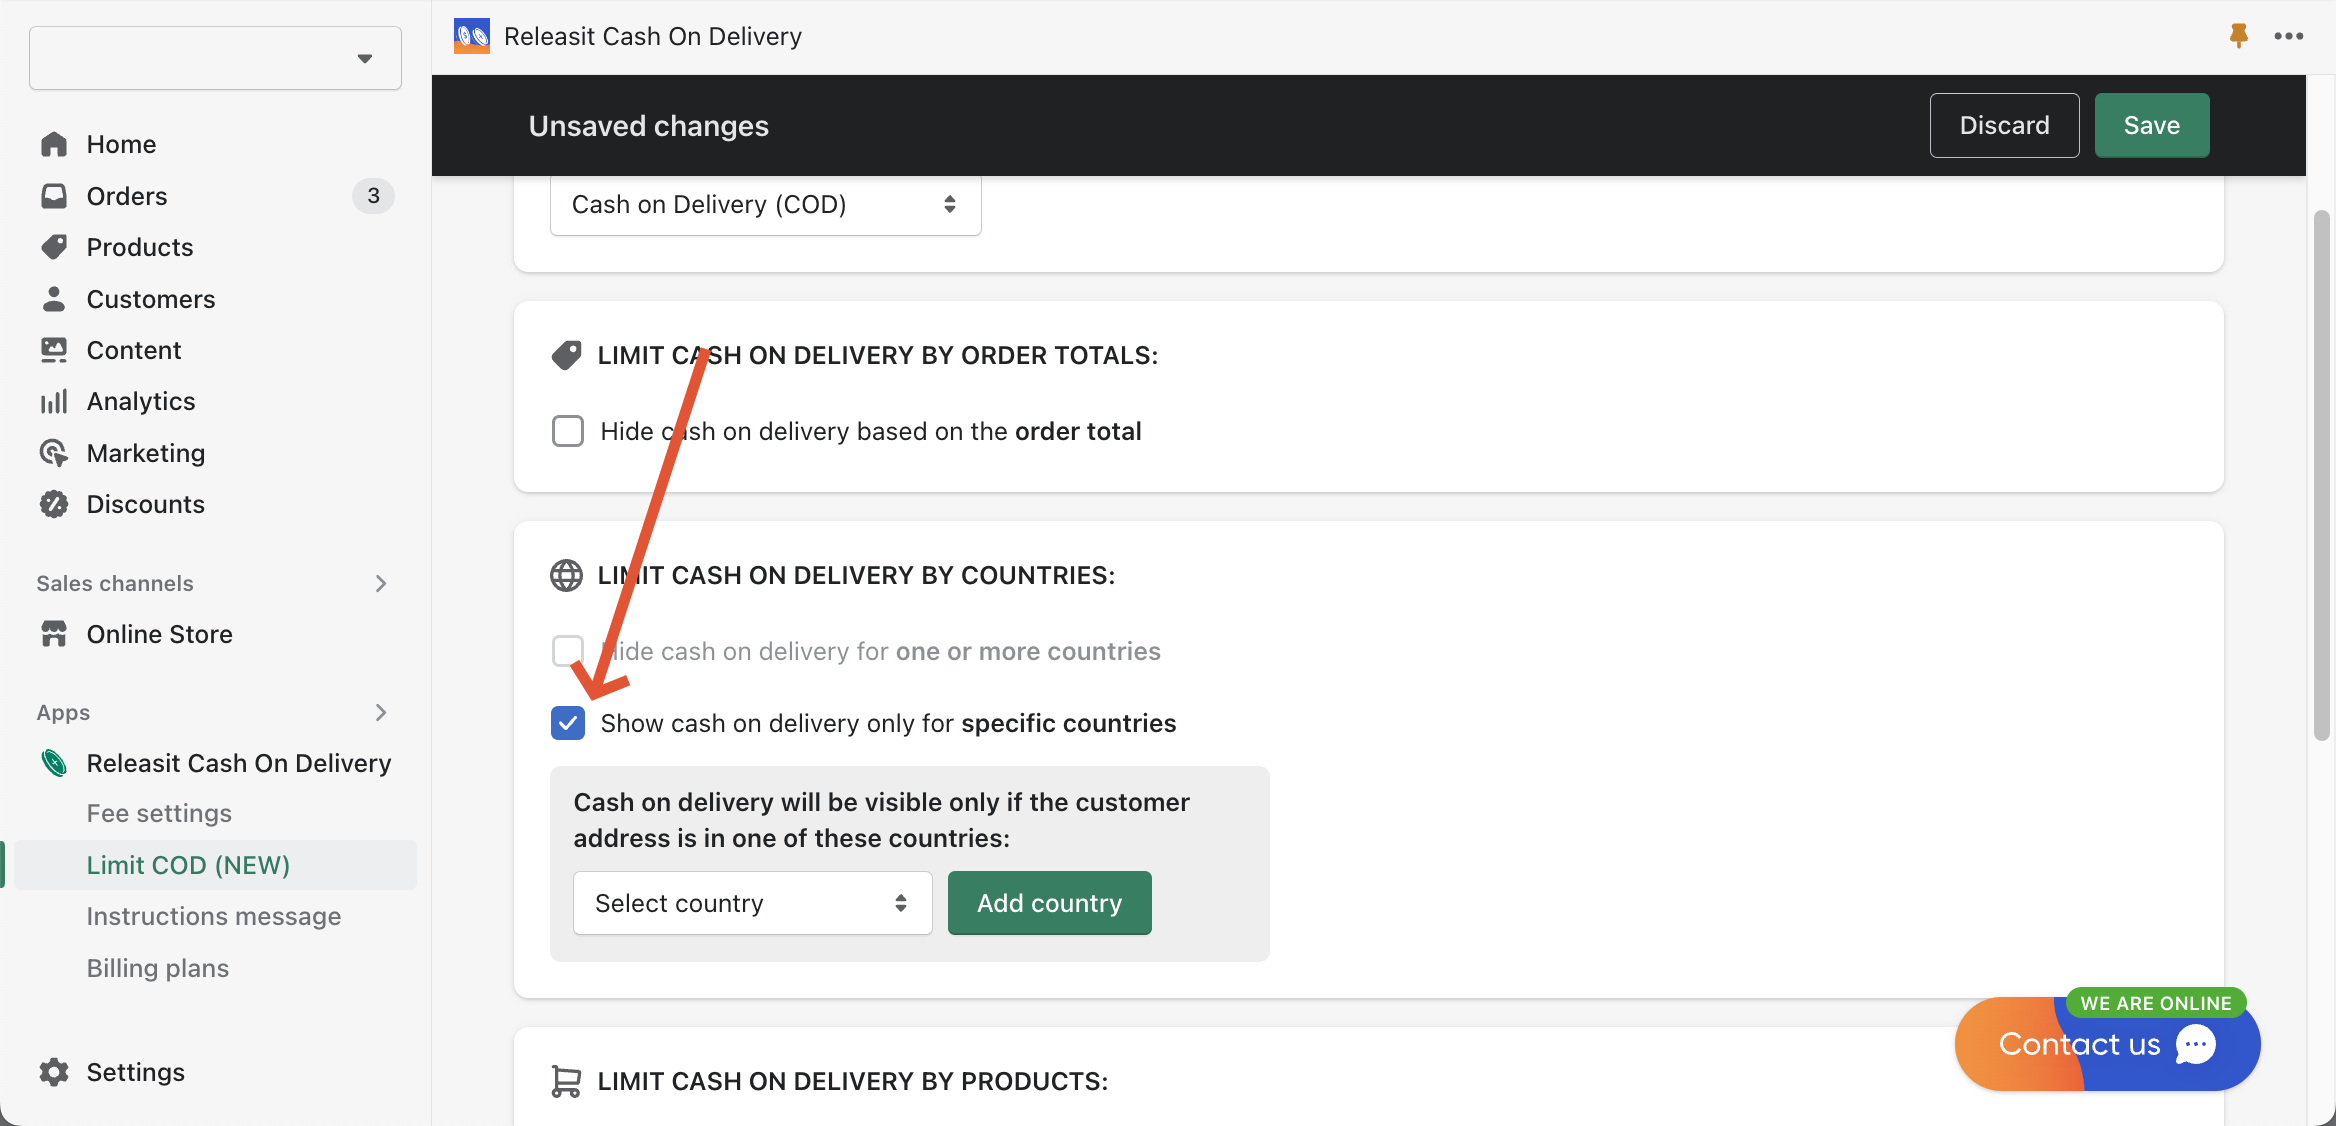 Releasit Cash On Delivery Limit COD page show only on some countries